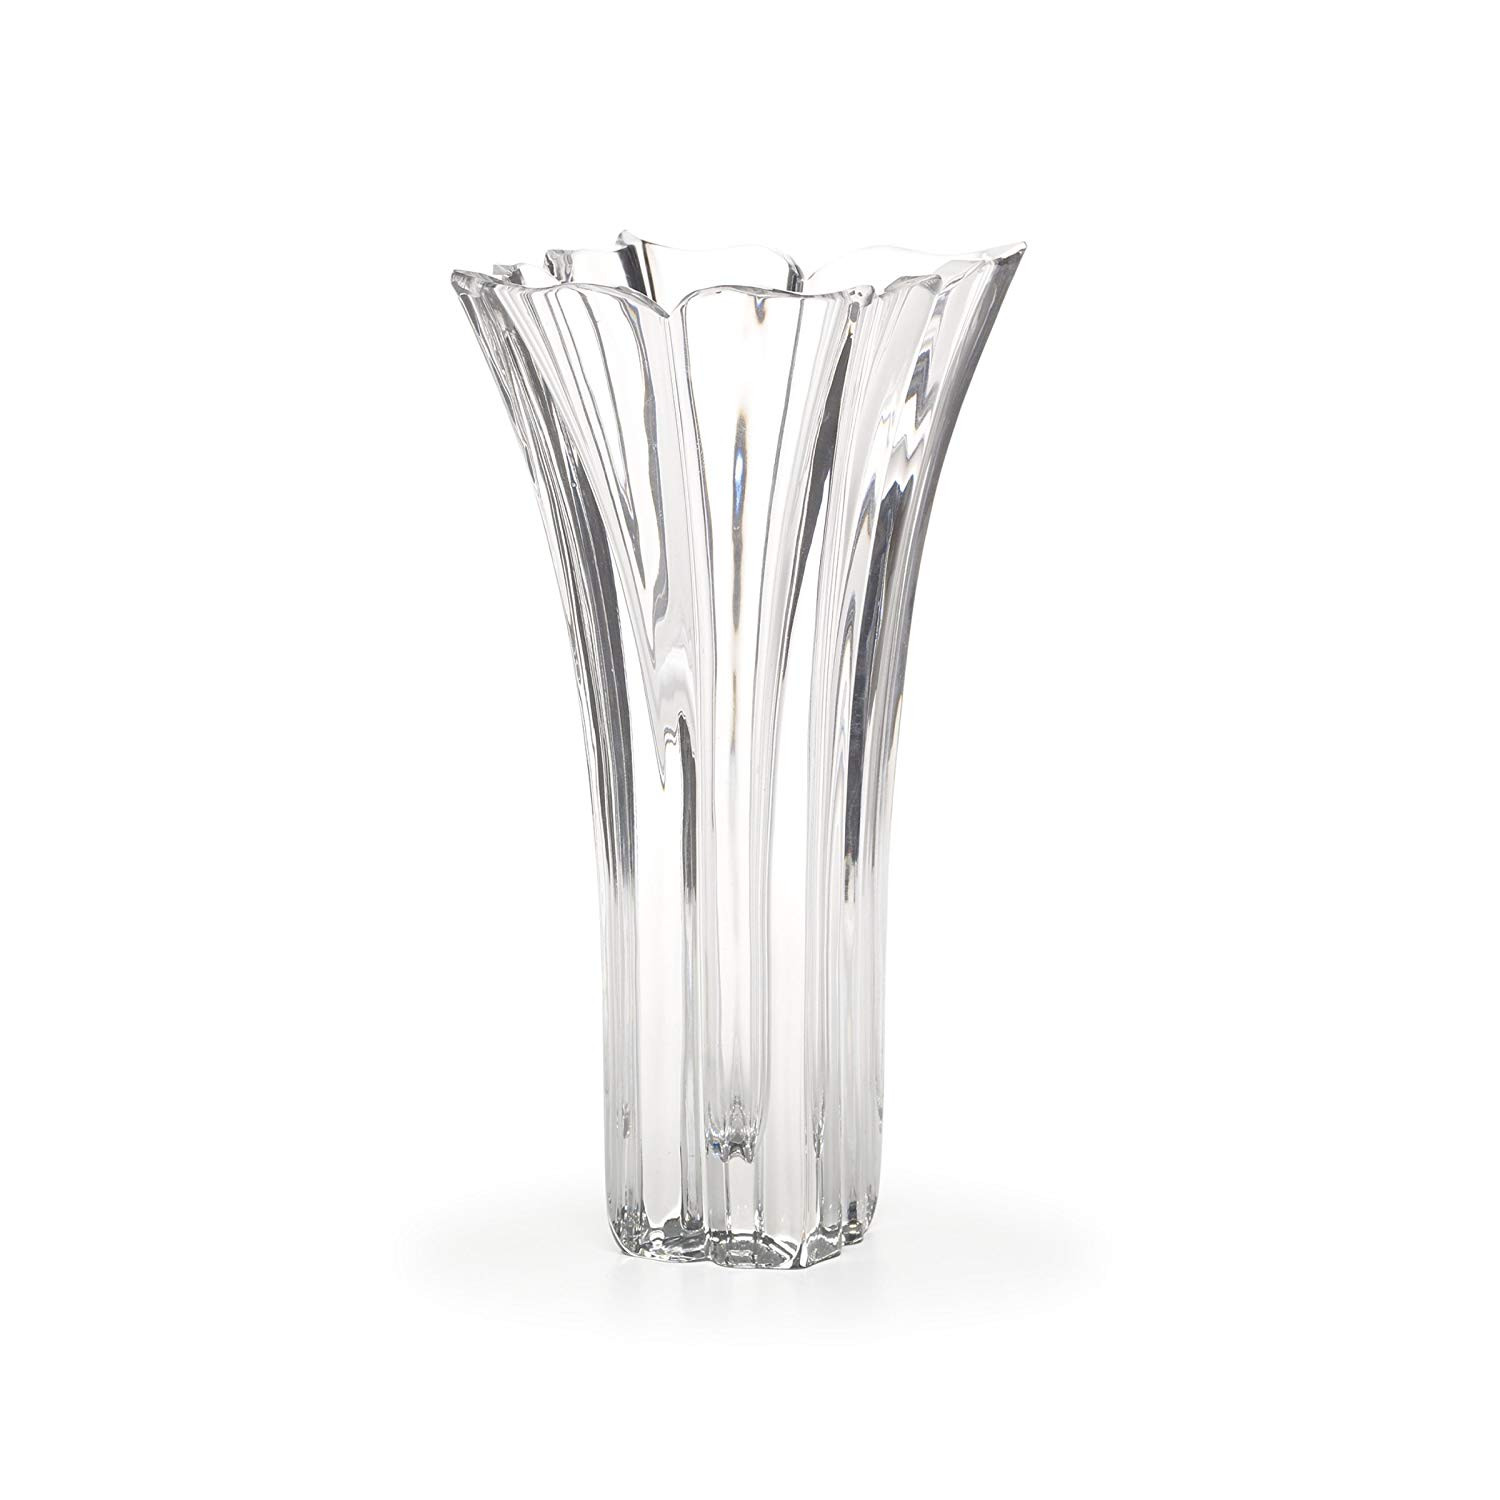 marquis by waterford sheridan flared 11 inch vase of amazon com mikasa crystal florale bud vase 8 inch home kitchen regarding 71 mobl h4l sl1500